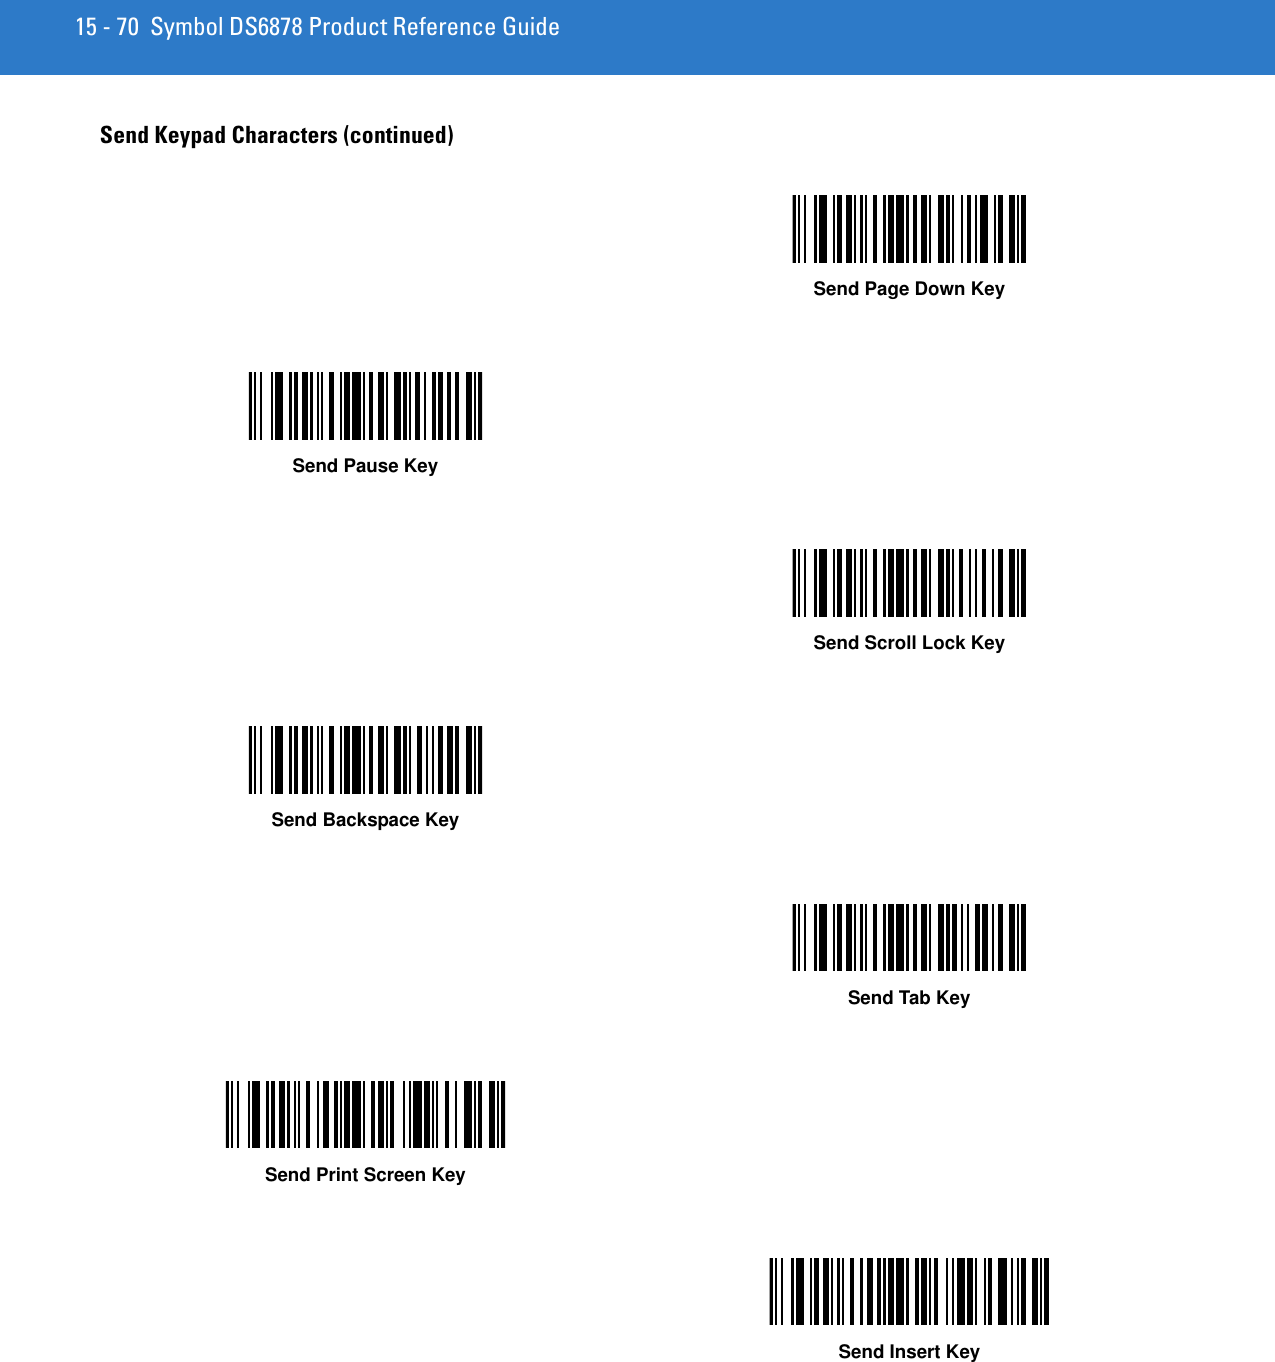 15 - 70 Symbol DS6878 Product Reference GuideSend Keypad Characters (continued)Send Page Down KeySend Pause KeySend Scroll Lock KeySend Backspace KeySend Tab KeySend Print Screen KeySend Insert Key